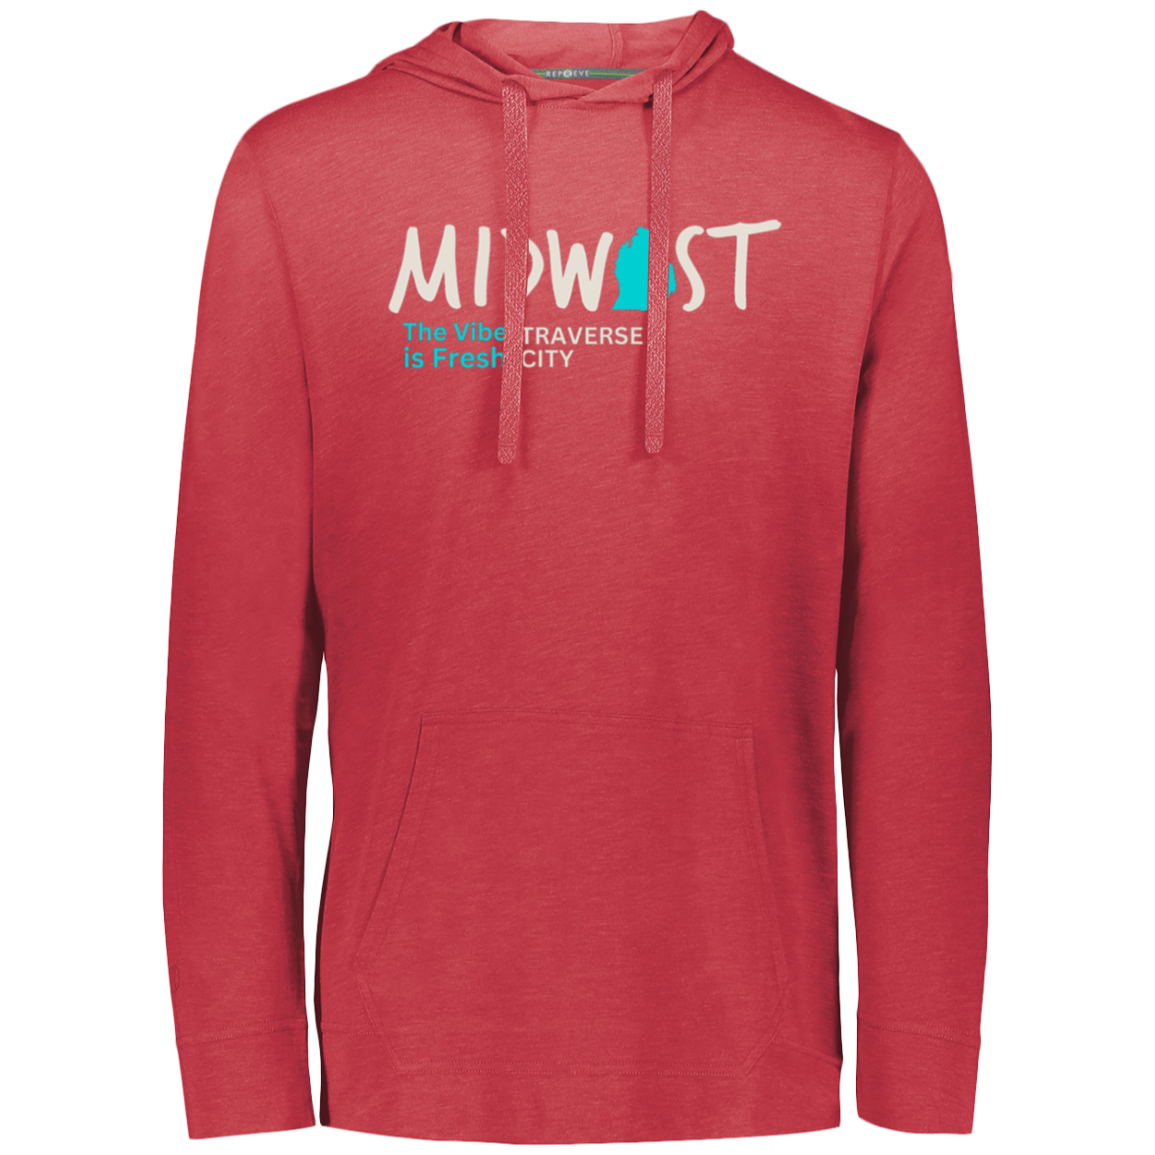 Midwest The Vibe is Fresh Traverse City Eco Lightweight Hoodie